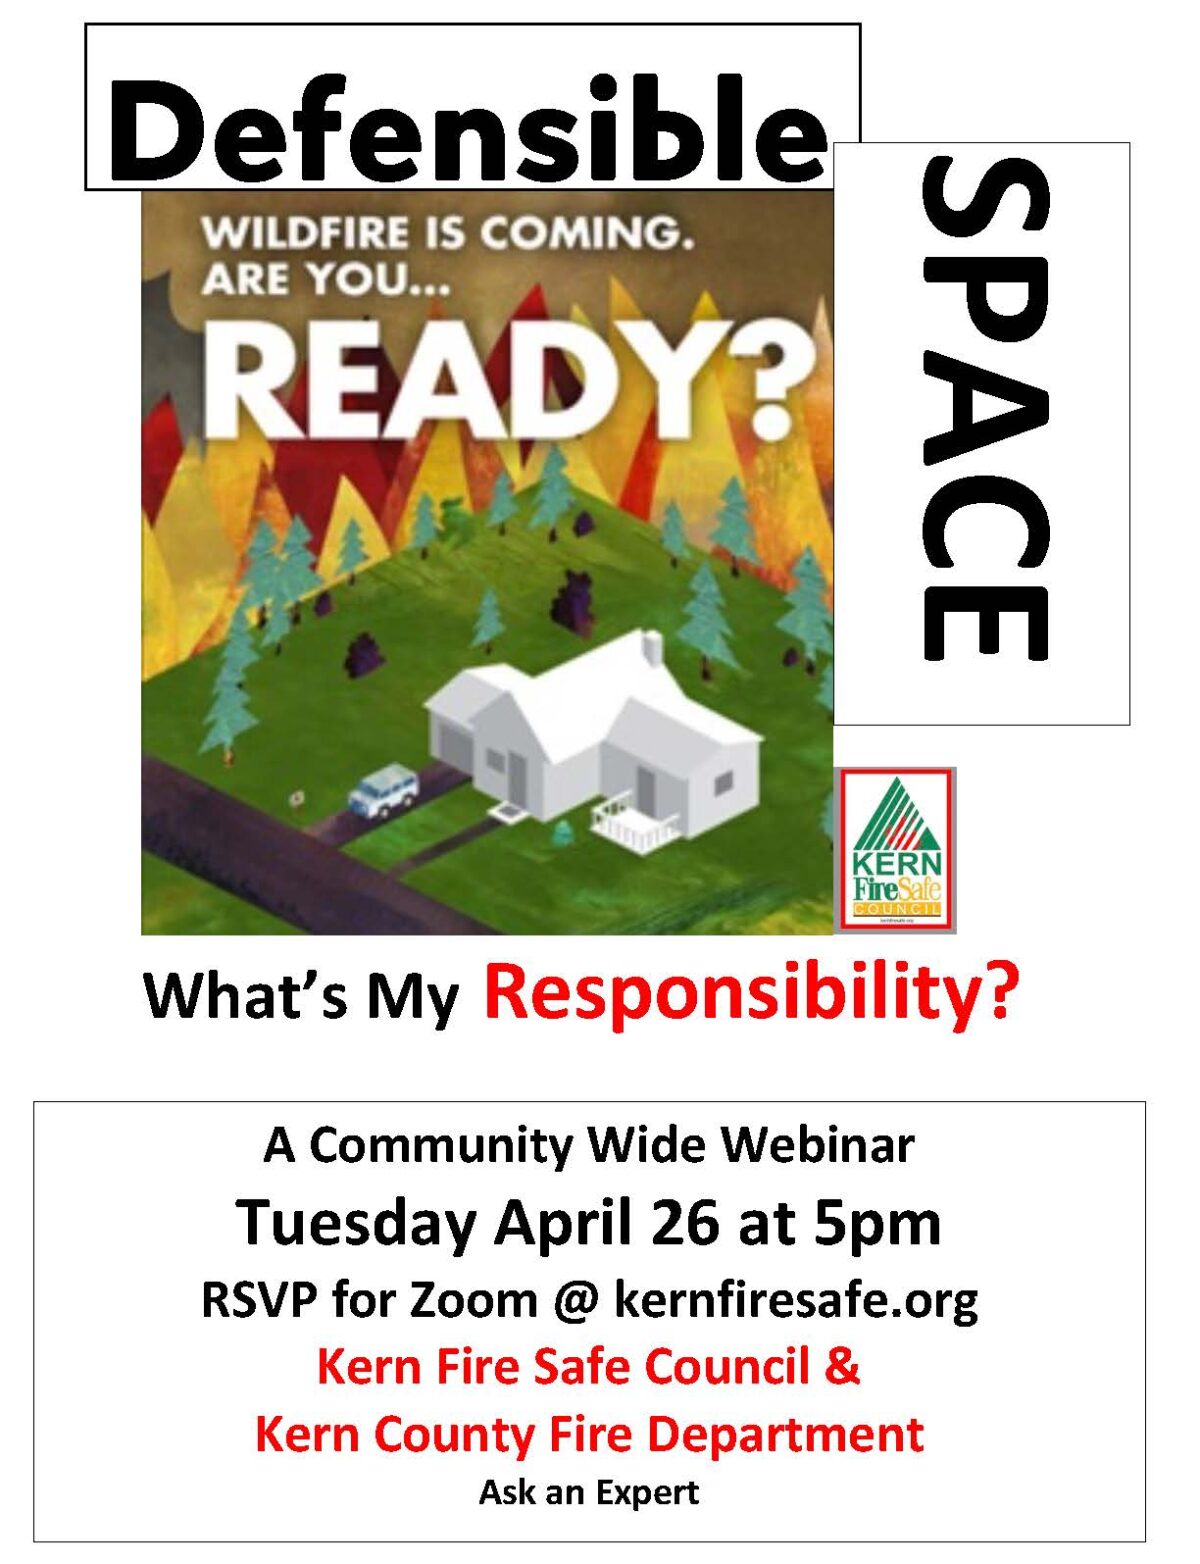 “Defensible Space: What’s My Responsibility?”